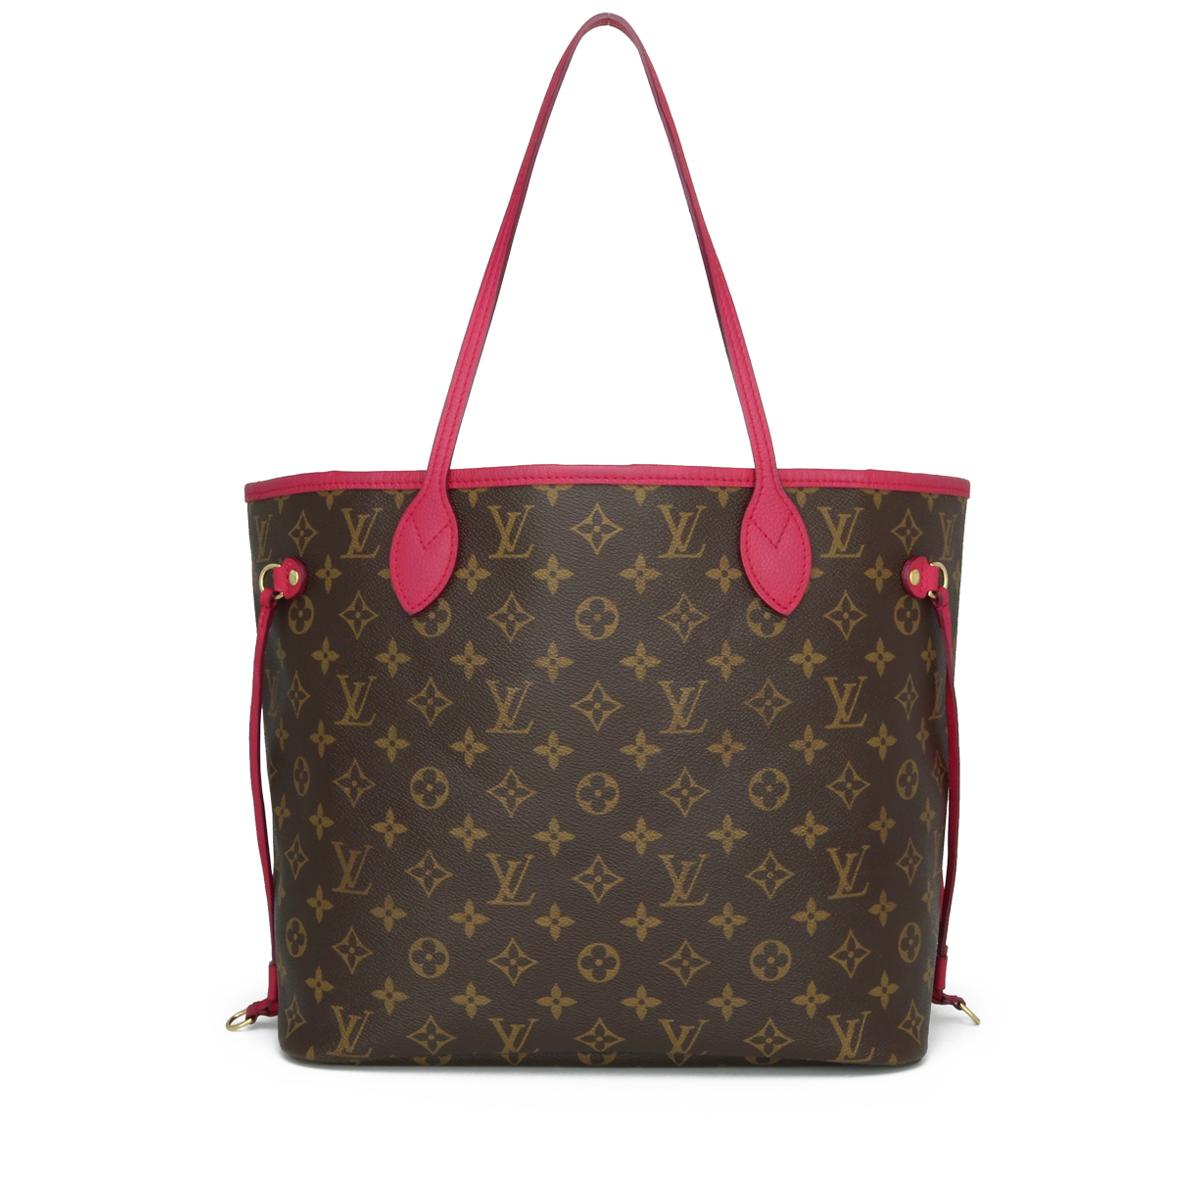 Louis Vuitton Neverfull MM Ikat Bag in Monogram Fuchsia 2013 Limited Edition In Good Condition For Sale In Huddersfield, GB